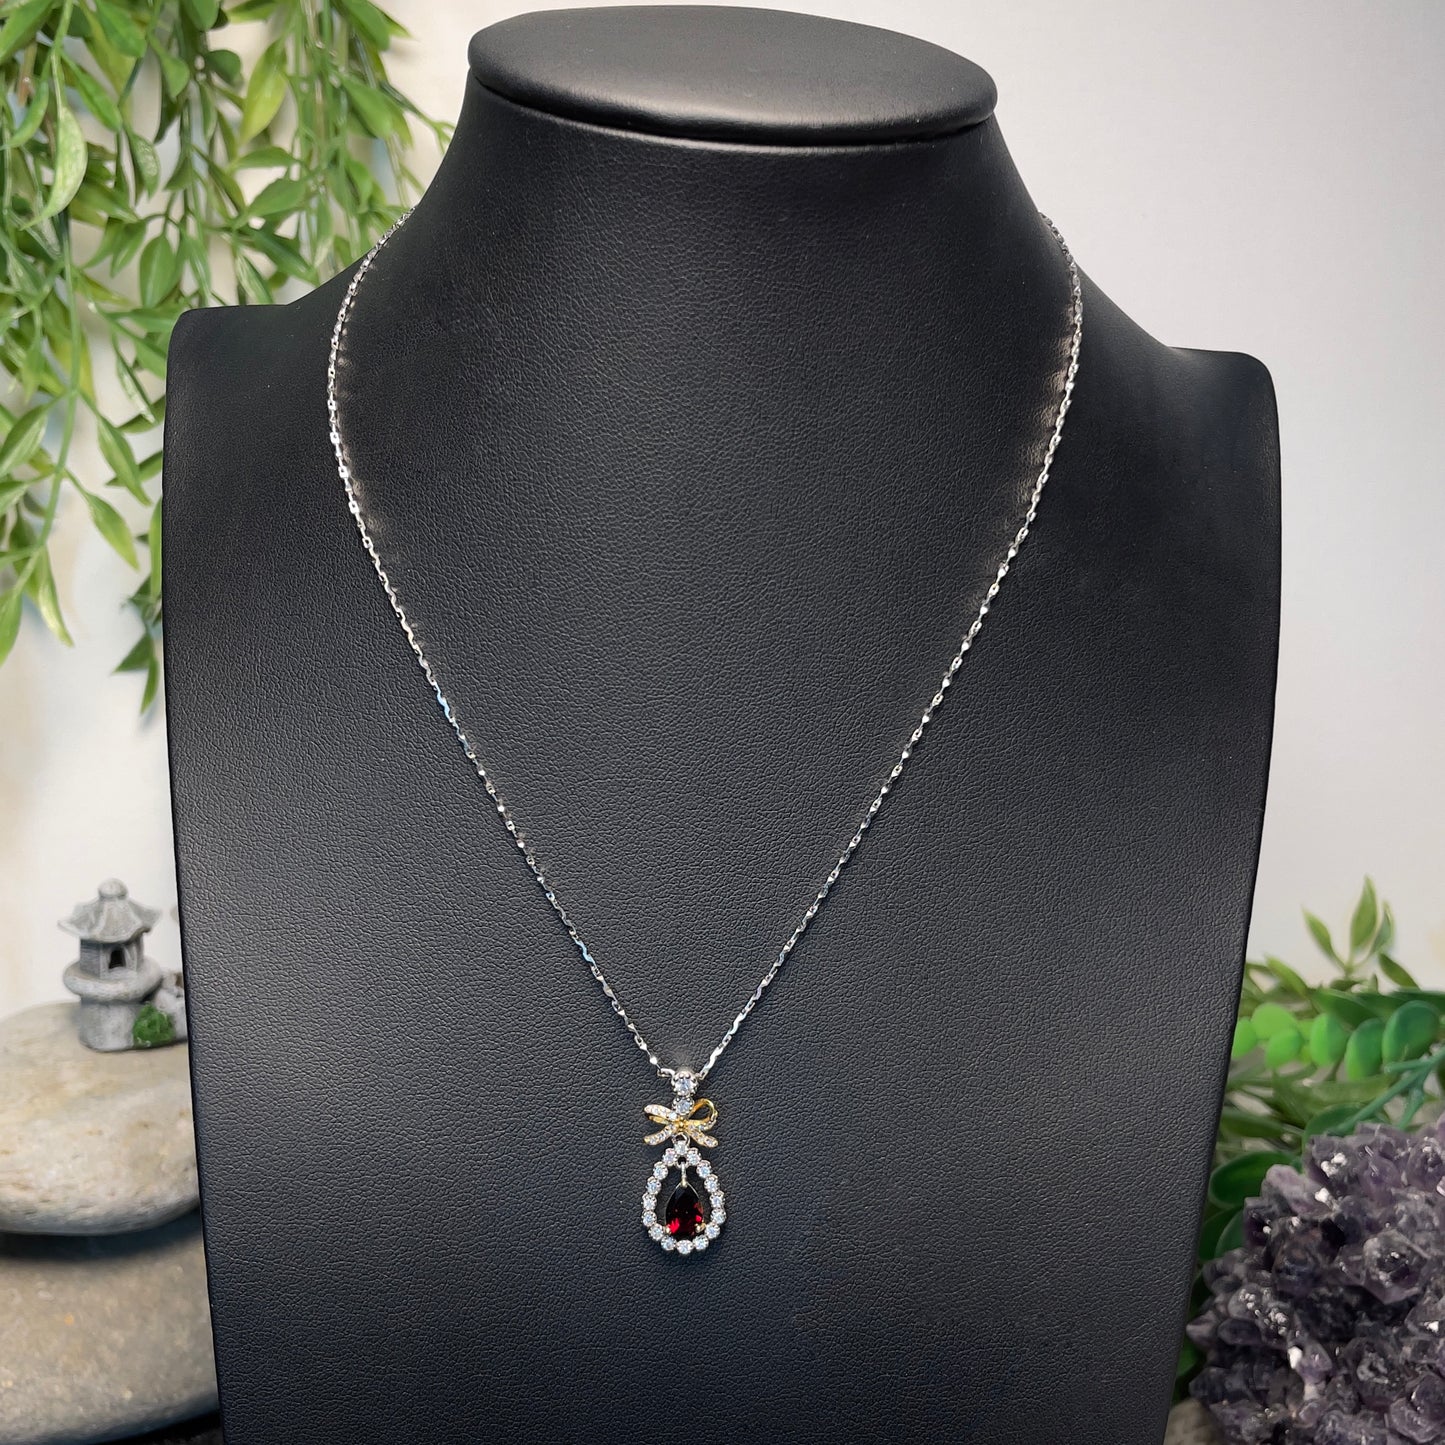 Stonelry Natural Garnet Bow Pendant Necklace